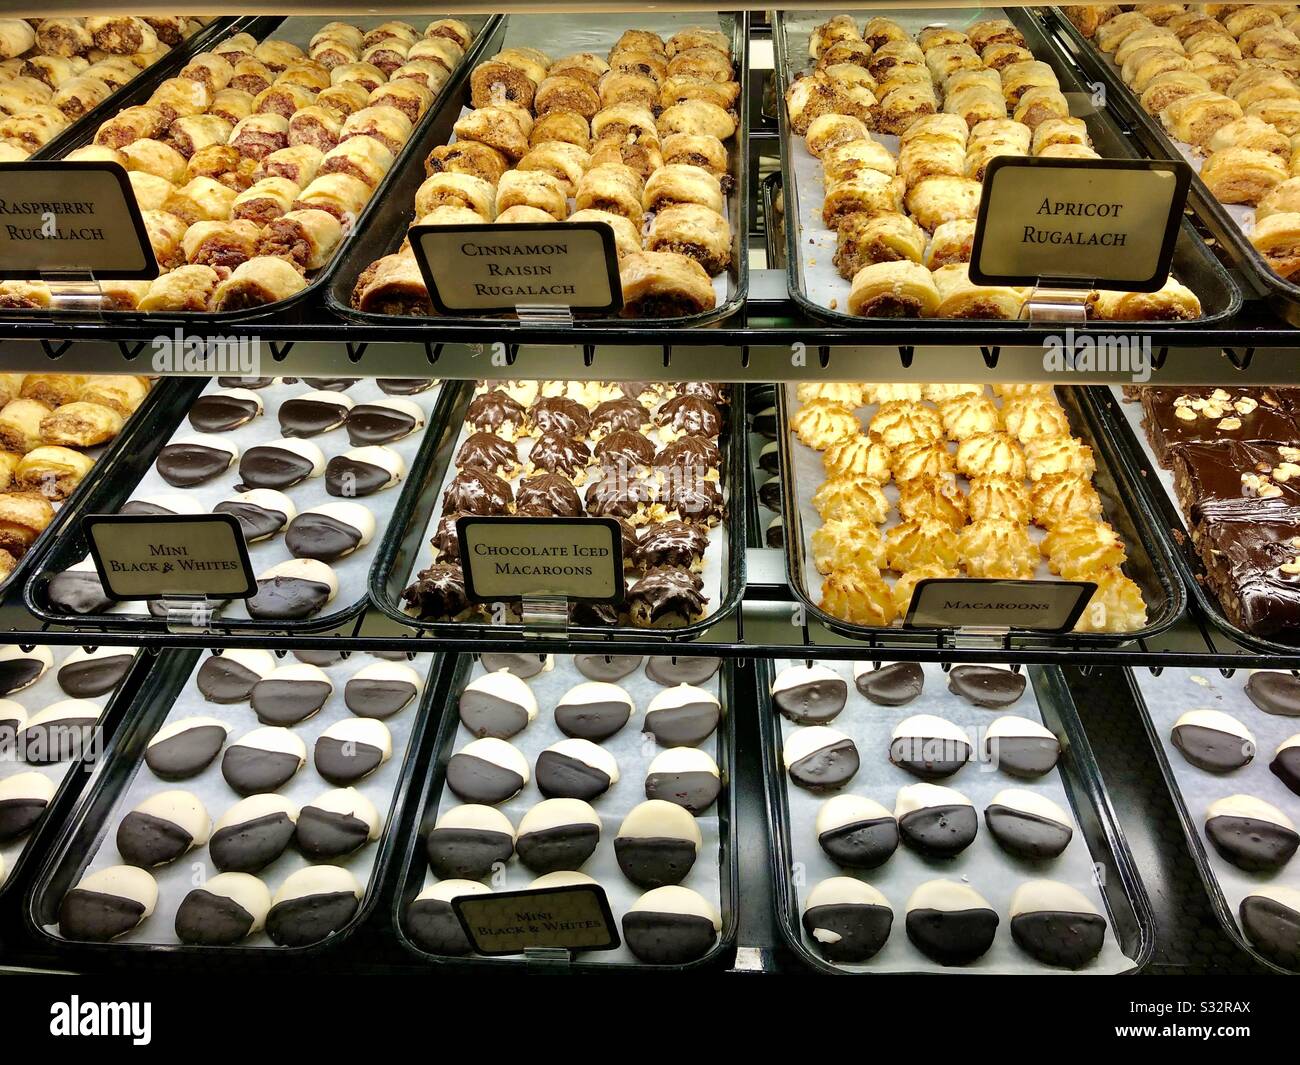 https://c8.alamy.com/comp/S32RAX/display-shelf-in-a-deli-and-bakery-shop-showing-various-types-of-pastry-and-rugalach-S32RAX.jpg